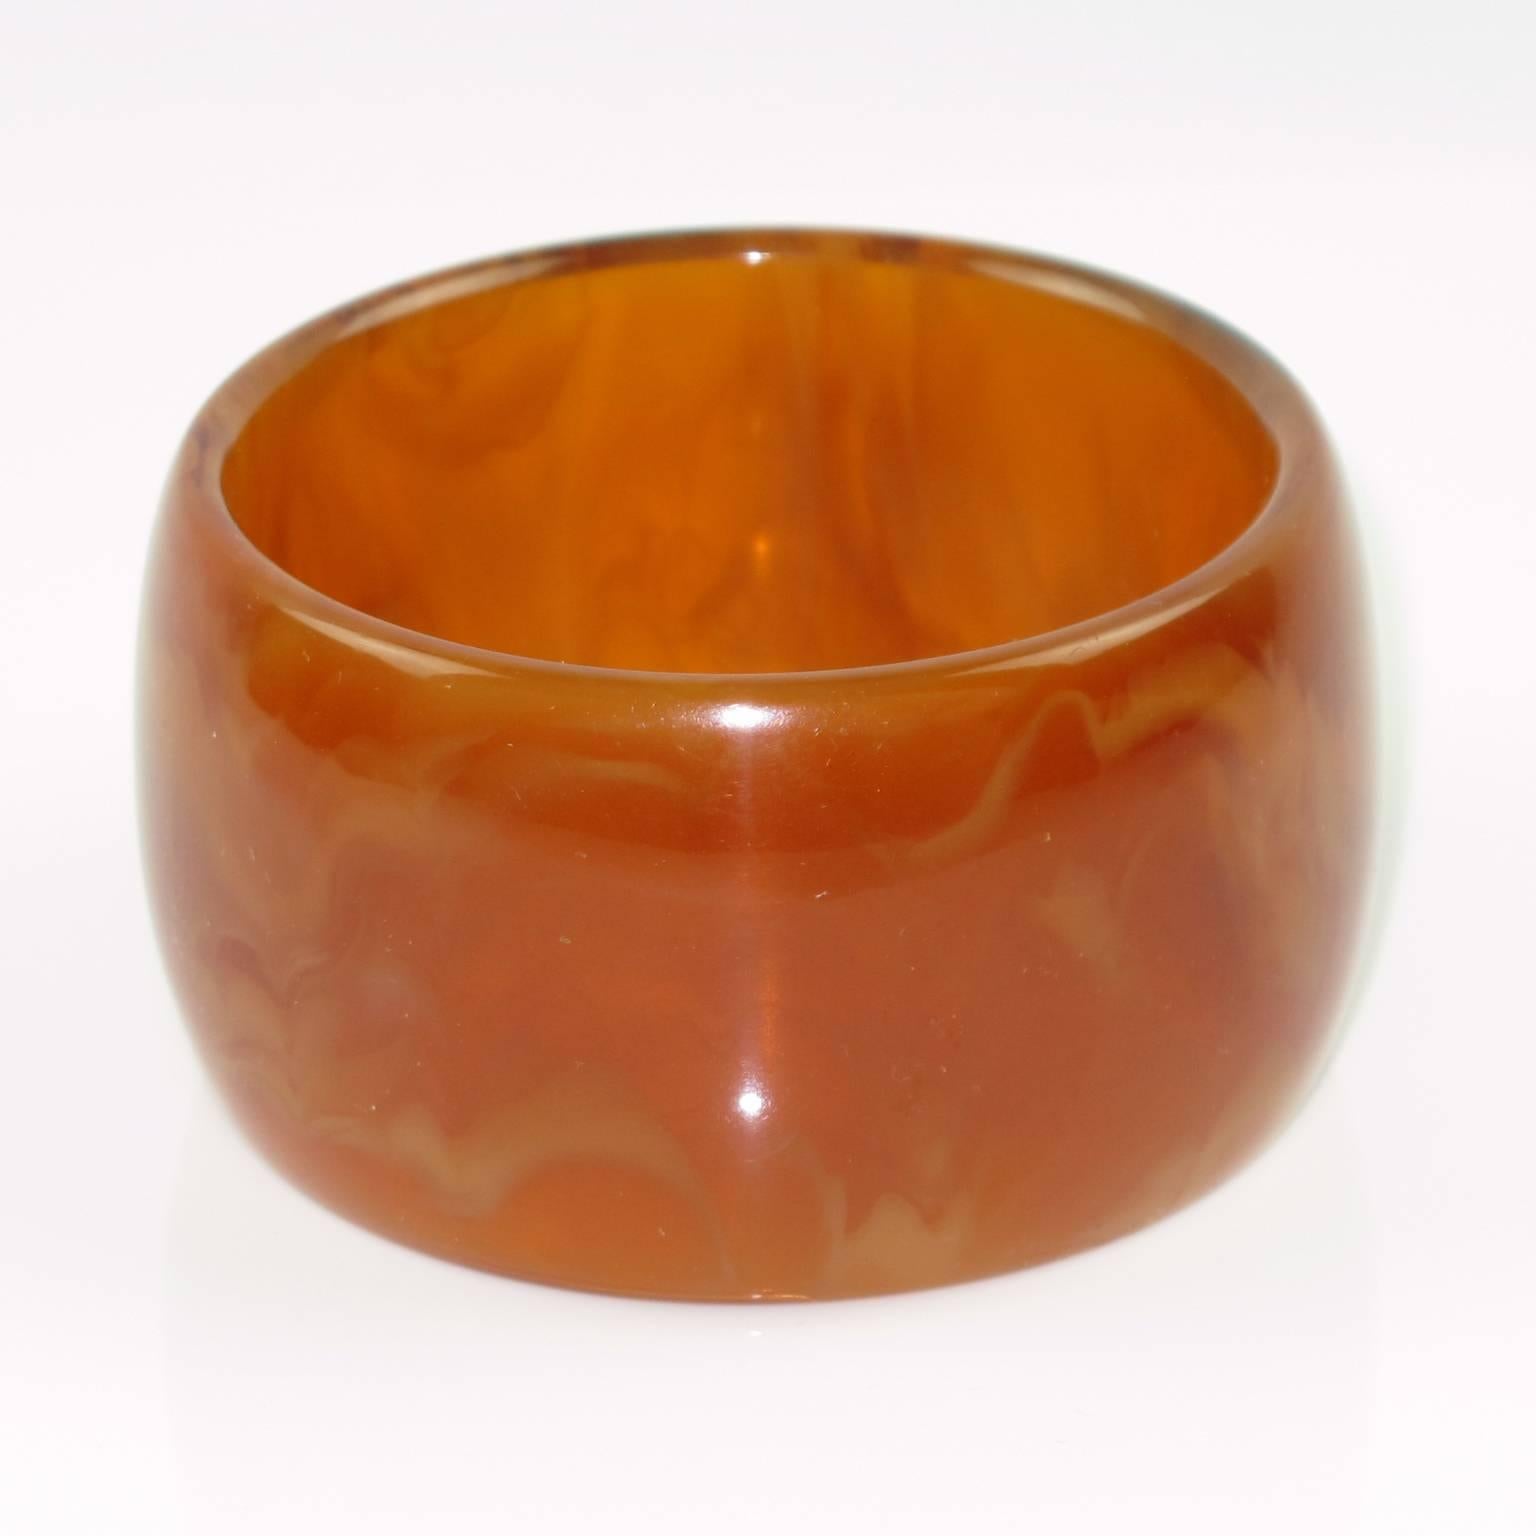 Vintage honey amber marble Bakelite bracelet bangle. Extra wide domed shape. Intense amber marble tone with honey cloudy swirling and lots of translucency. Excellent vintage condition. France, circa 1950s.

Measurements: Inside across = 2.63 in.